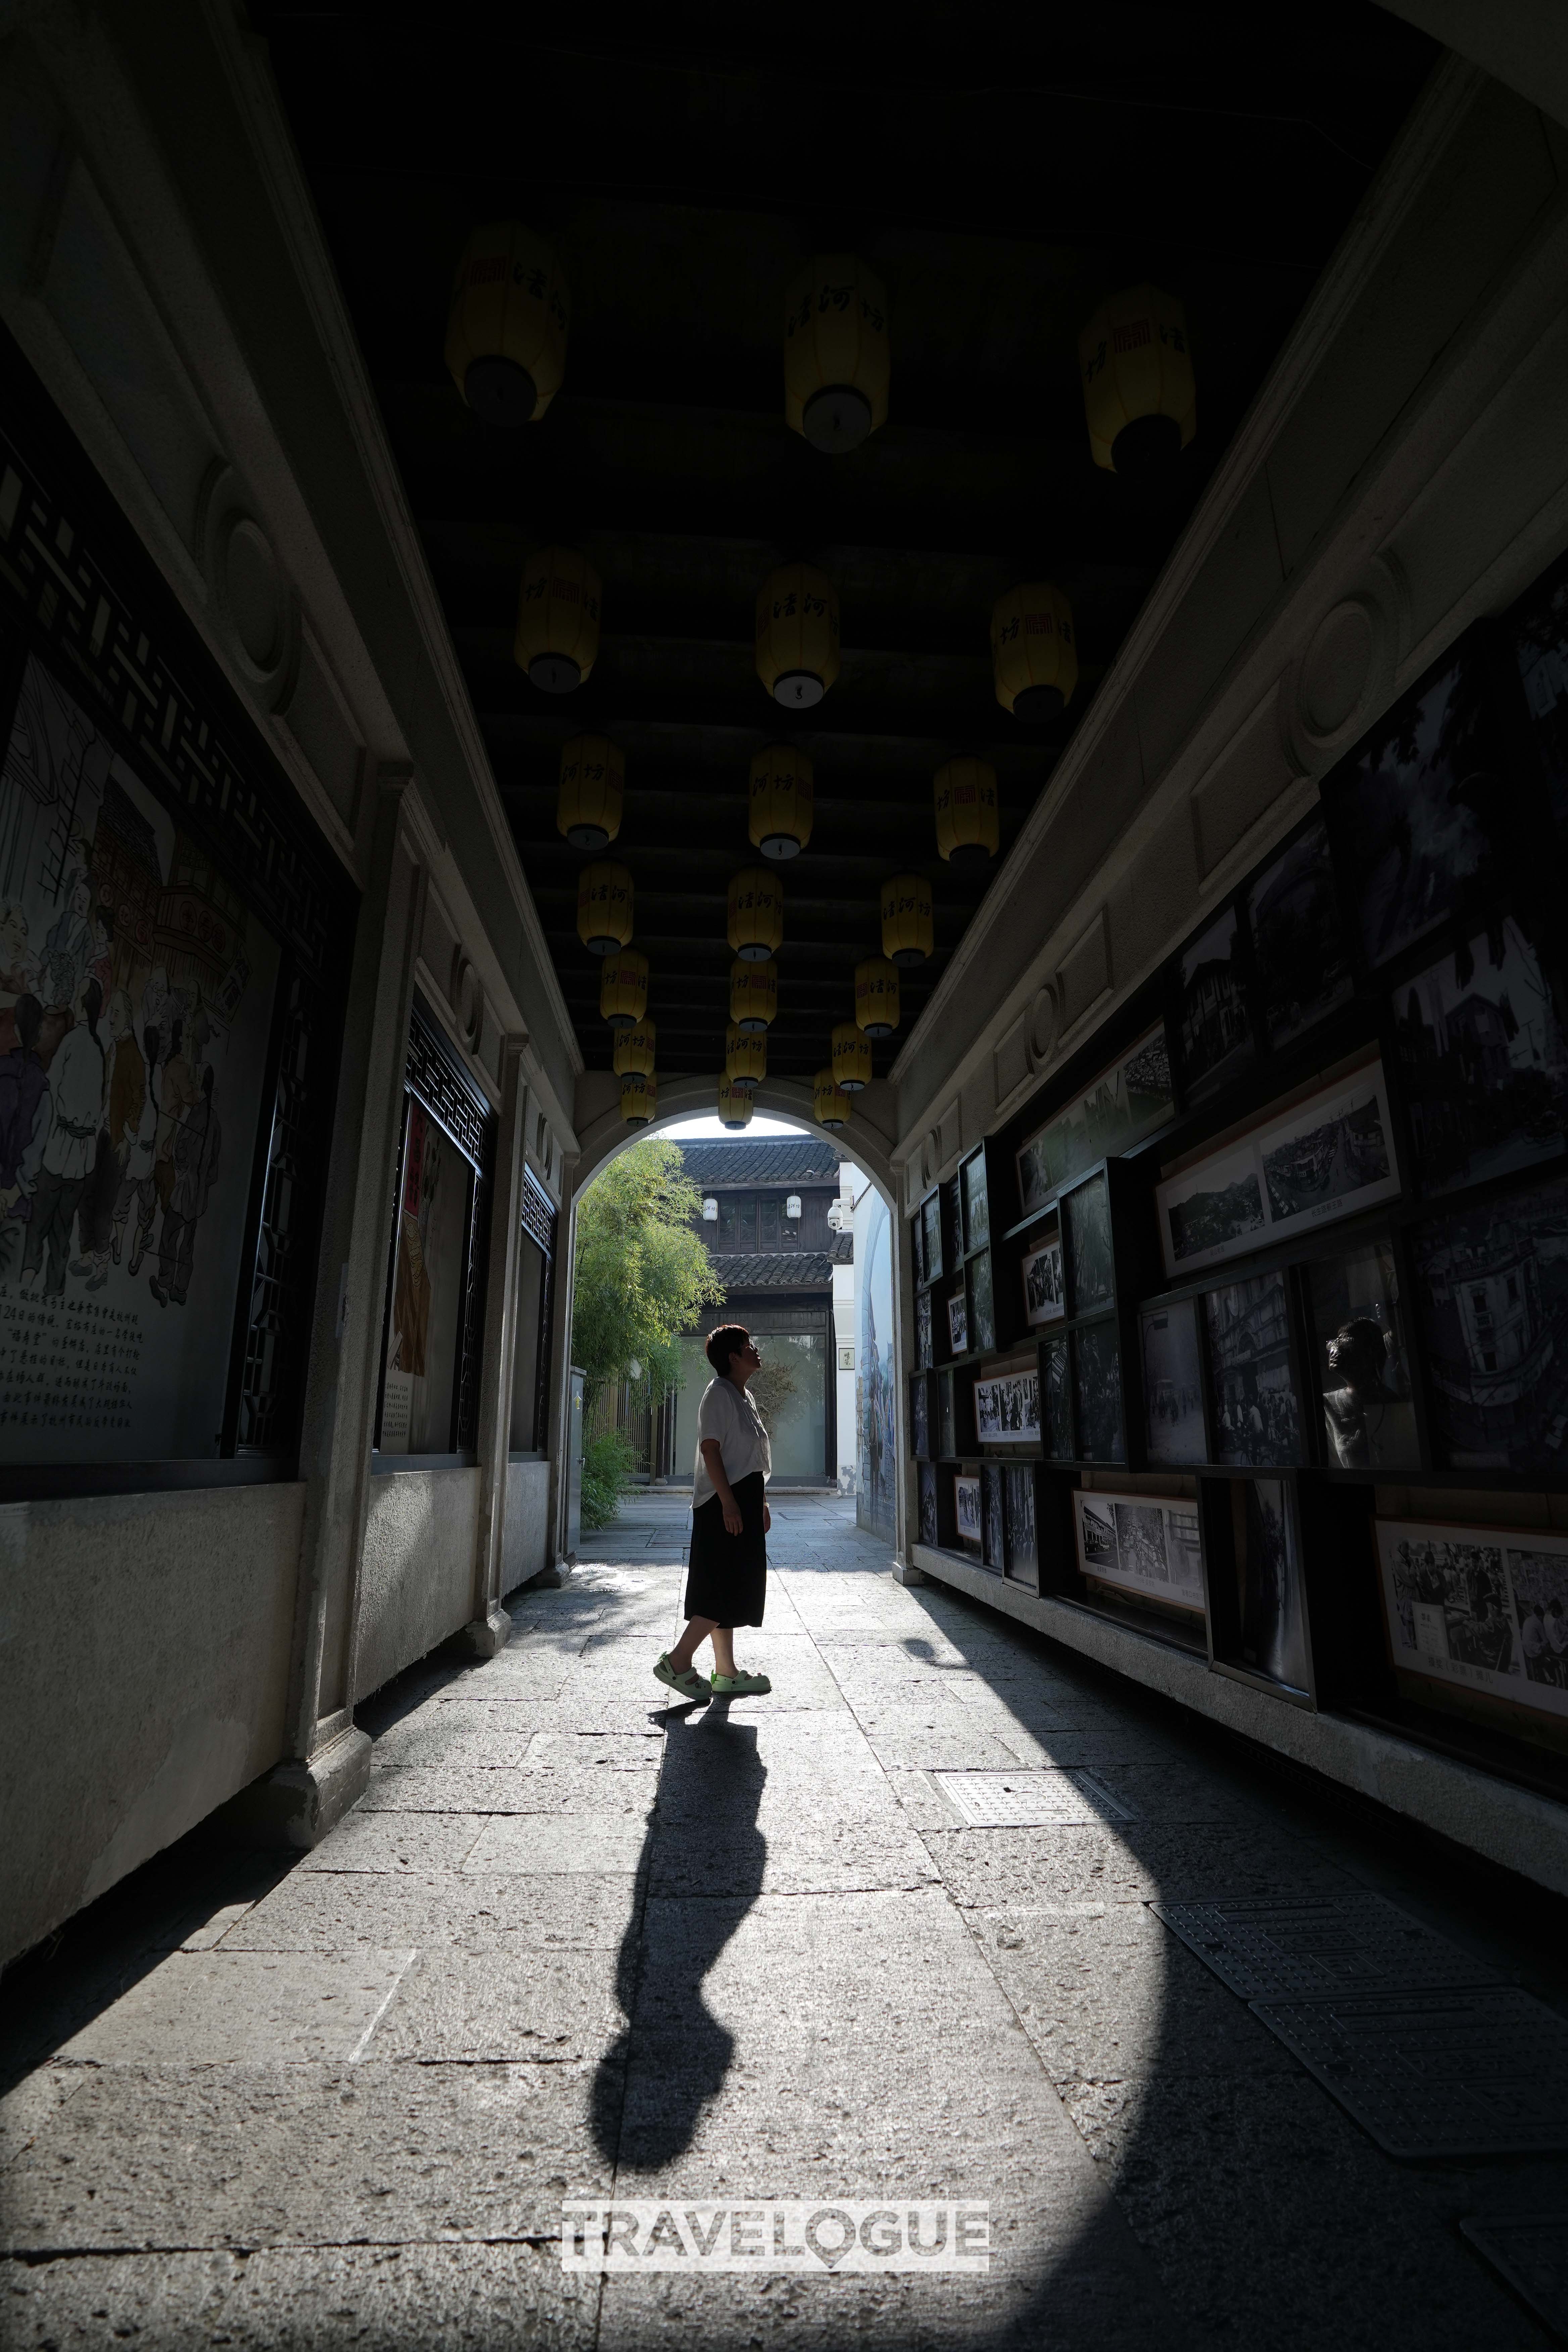 This undated photo shows a view of Qinghe Old Street in Hangzhou, east China's Zhejiang Province. /CGTN